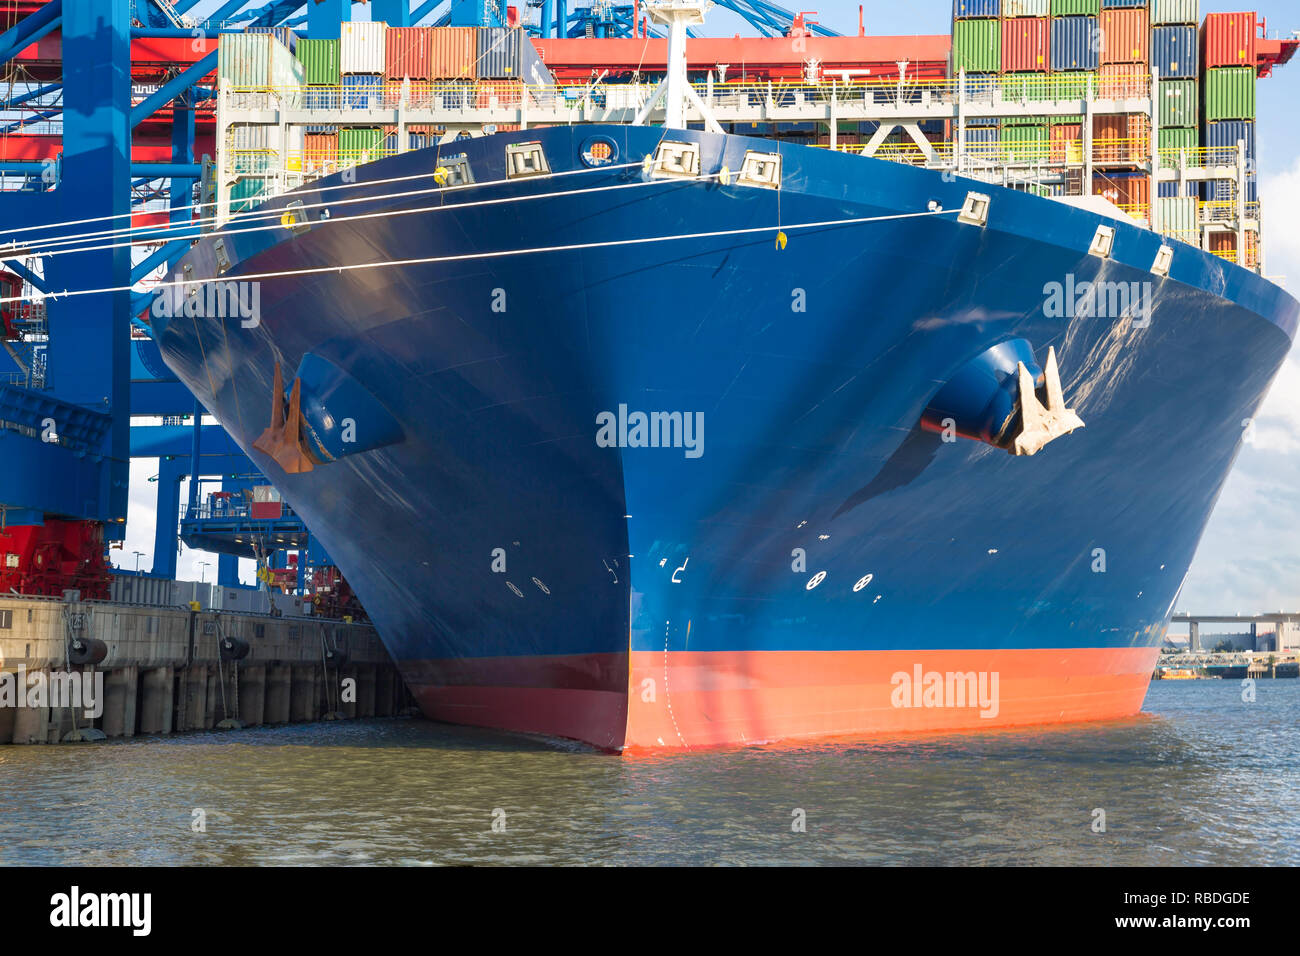 Big blue Container ship during loading at the quayside Stock Photo